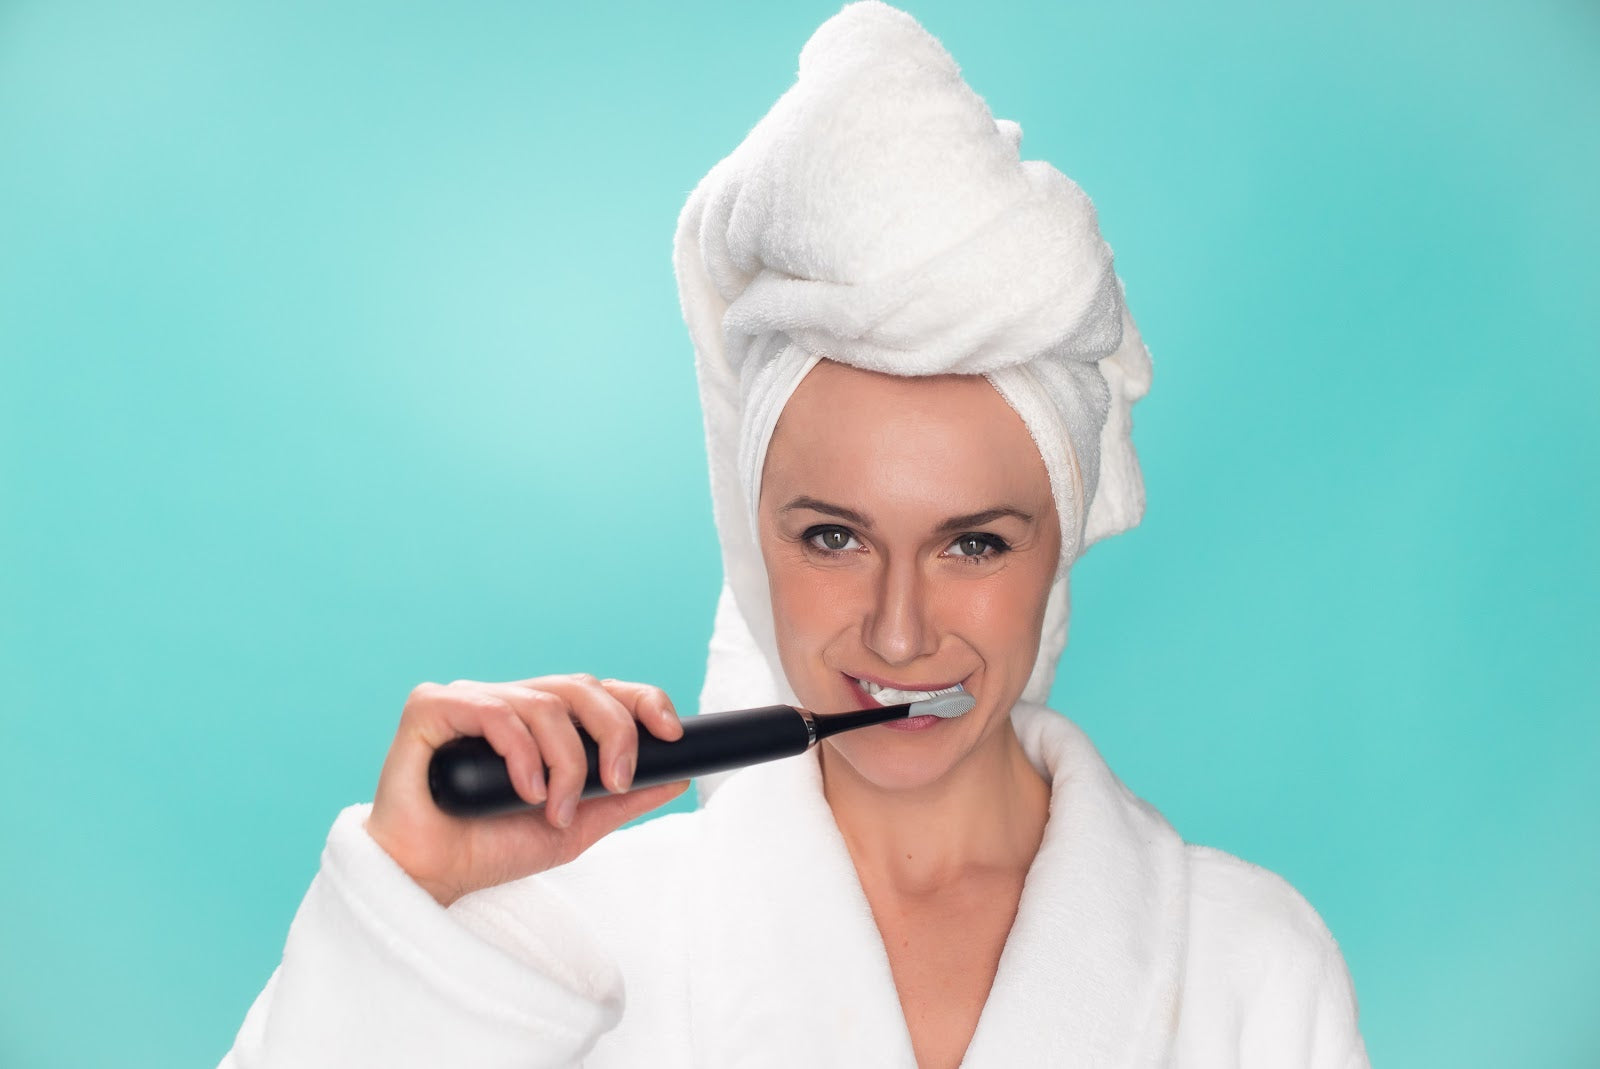 Everything You Need to Know on How to Use an Electric Toothbrush